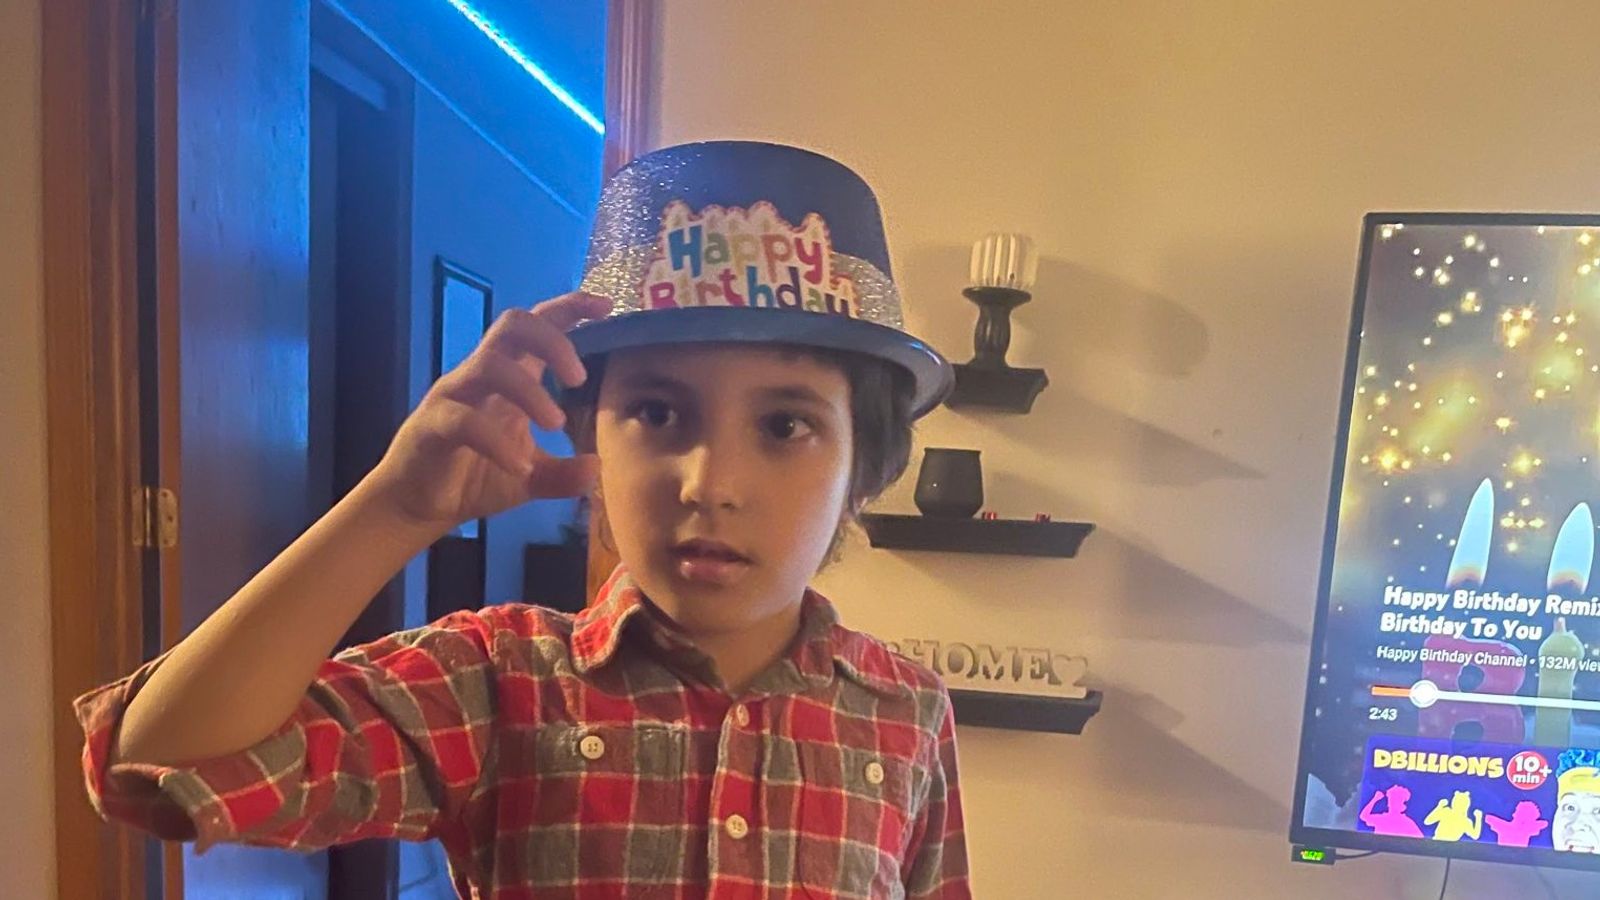 Muslim boy, 6, dies after being stabbed 26 times in suspected hate crime in Illinois